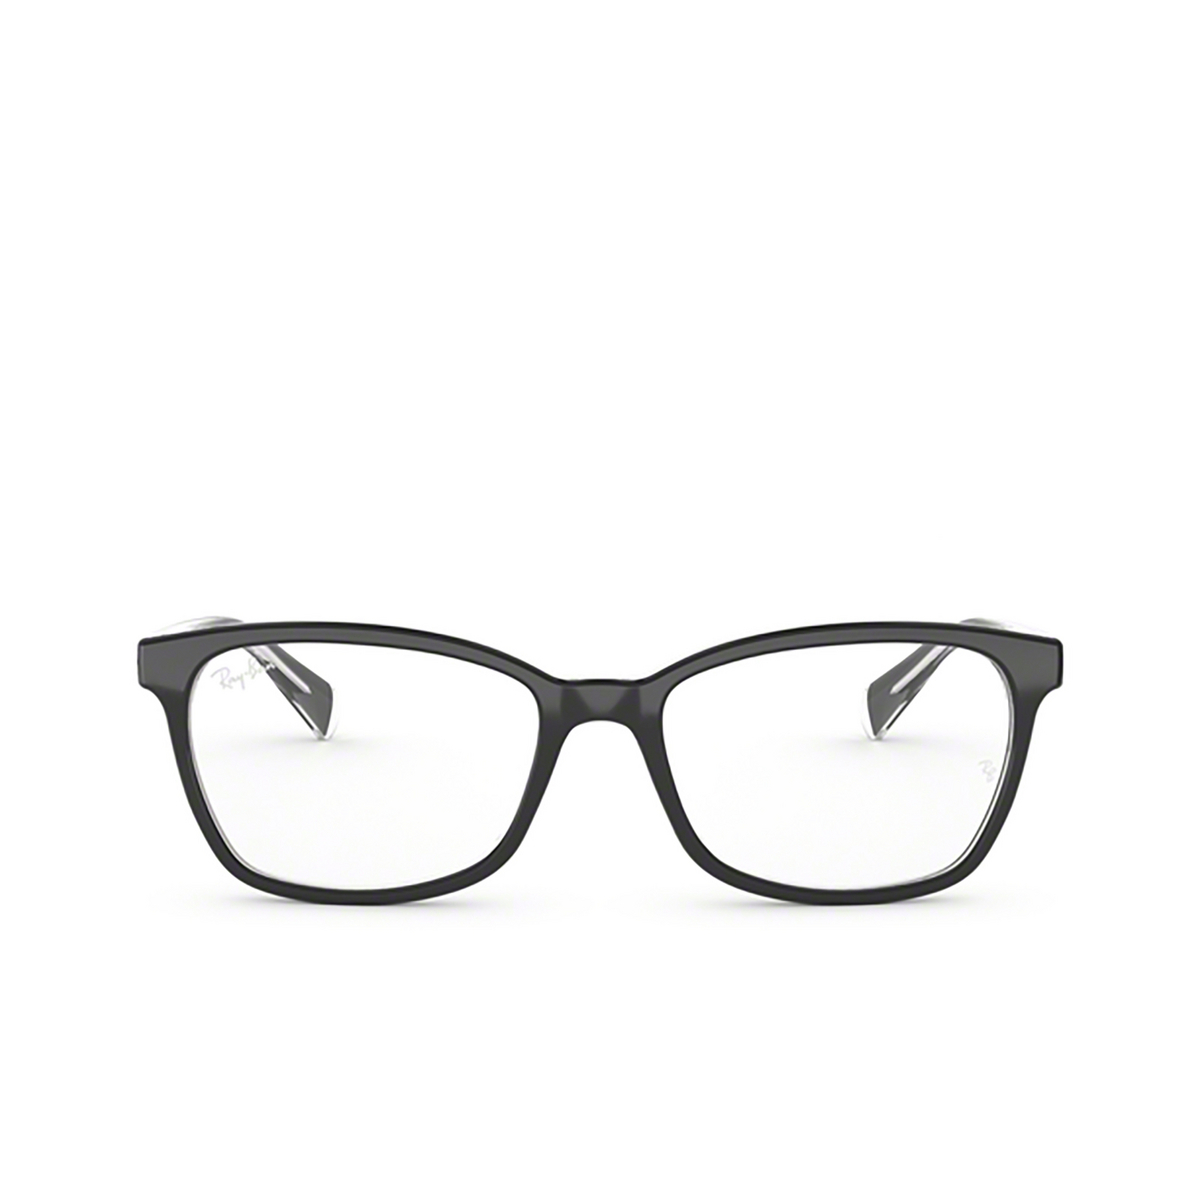 Ray-Ban RX5362 Eyeglasses 2034 TOP BLACK ON TRANSPARENT - front view